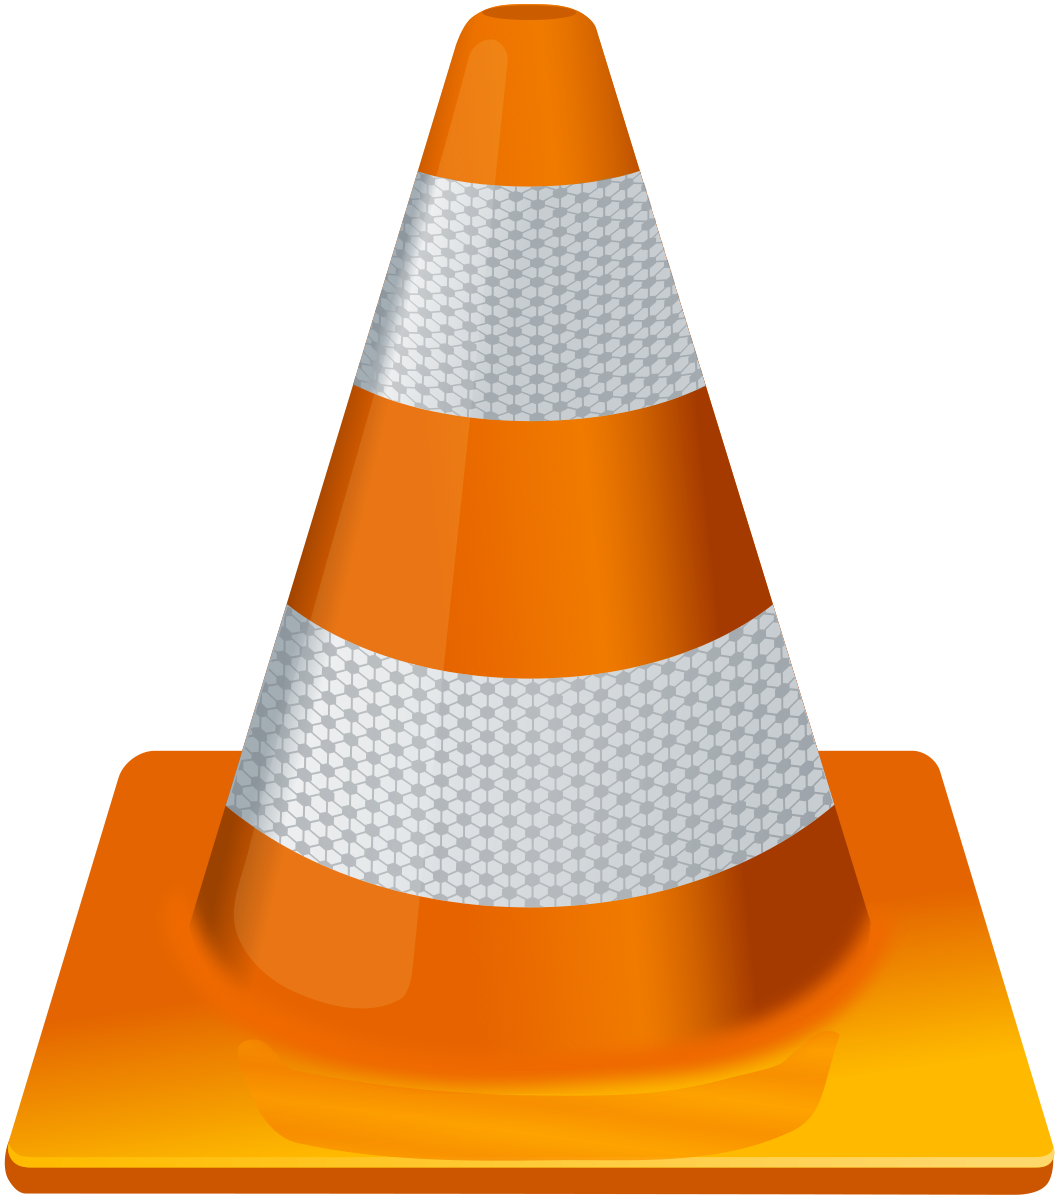 VLC is free to download and use.